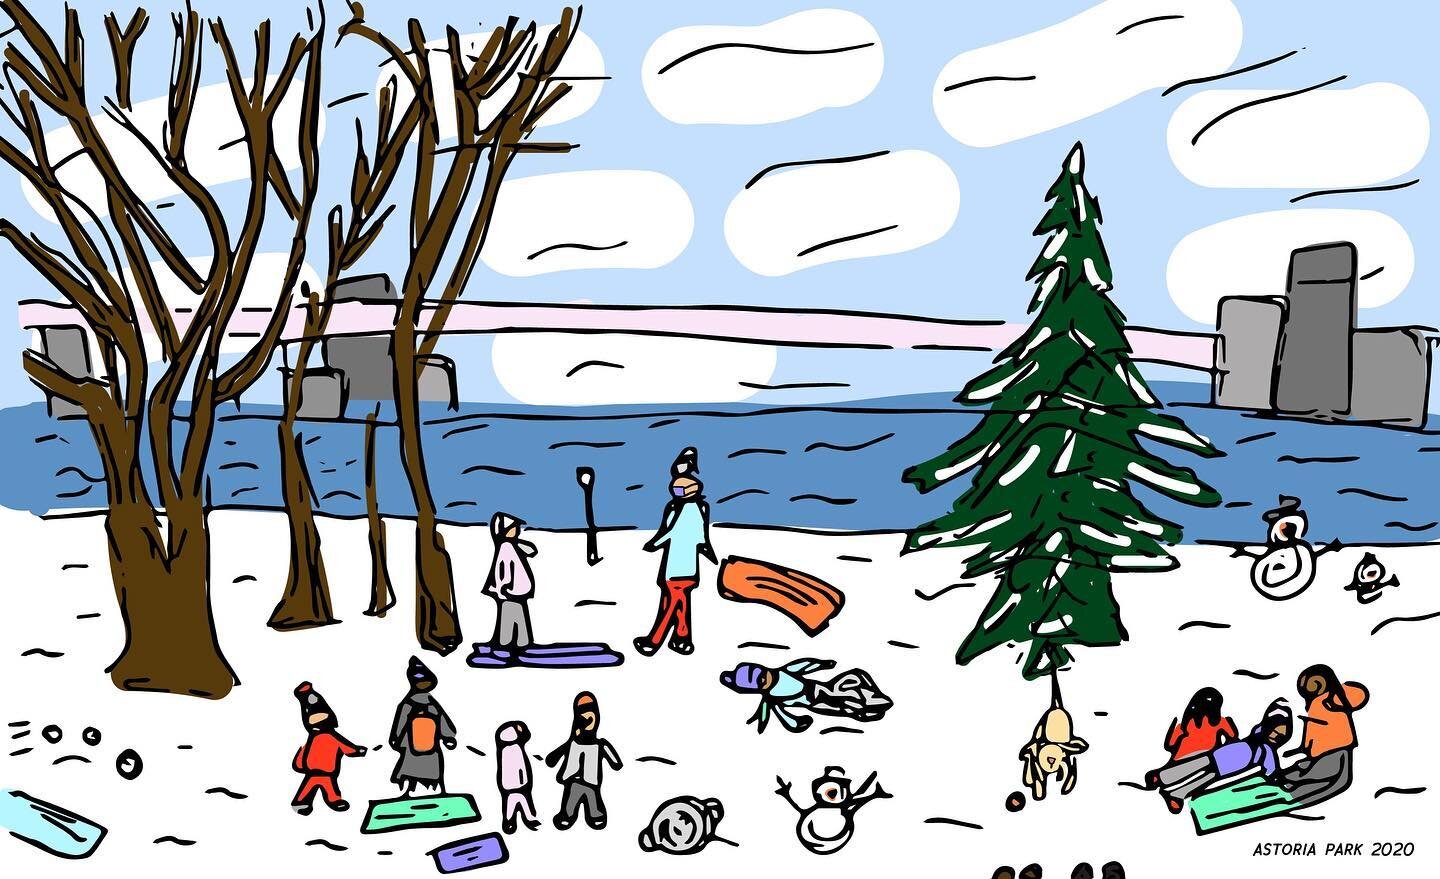 Winter storm in Astoria Park, 2020 - old news, new drawing. This park has always been charming - the ice cream trucks, the group BBQs, the public pool, the feeling of going back in time. Now,
10 months into the pandemic, that park charm has gotten st